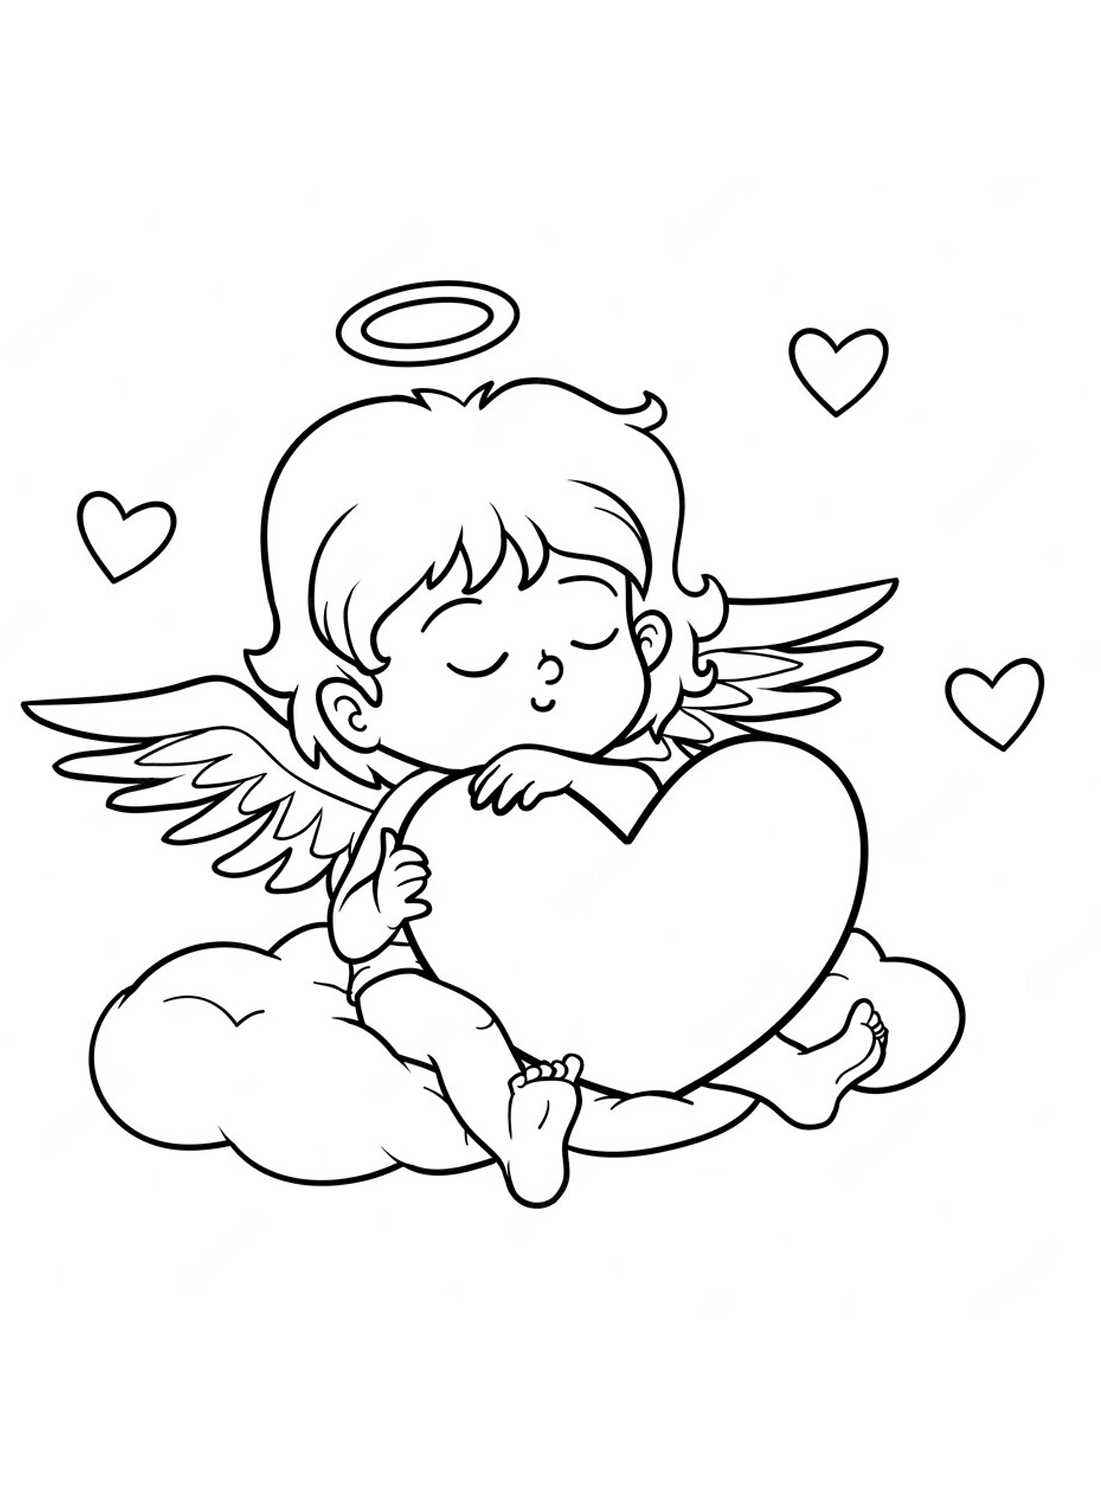 Angel hug the heart coloring picture